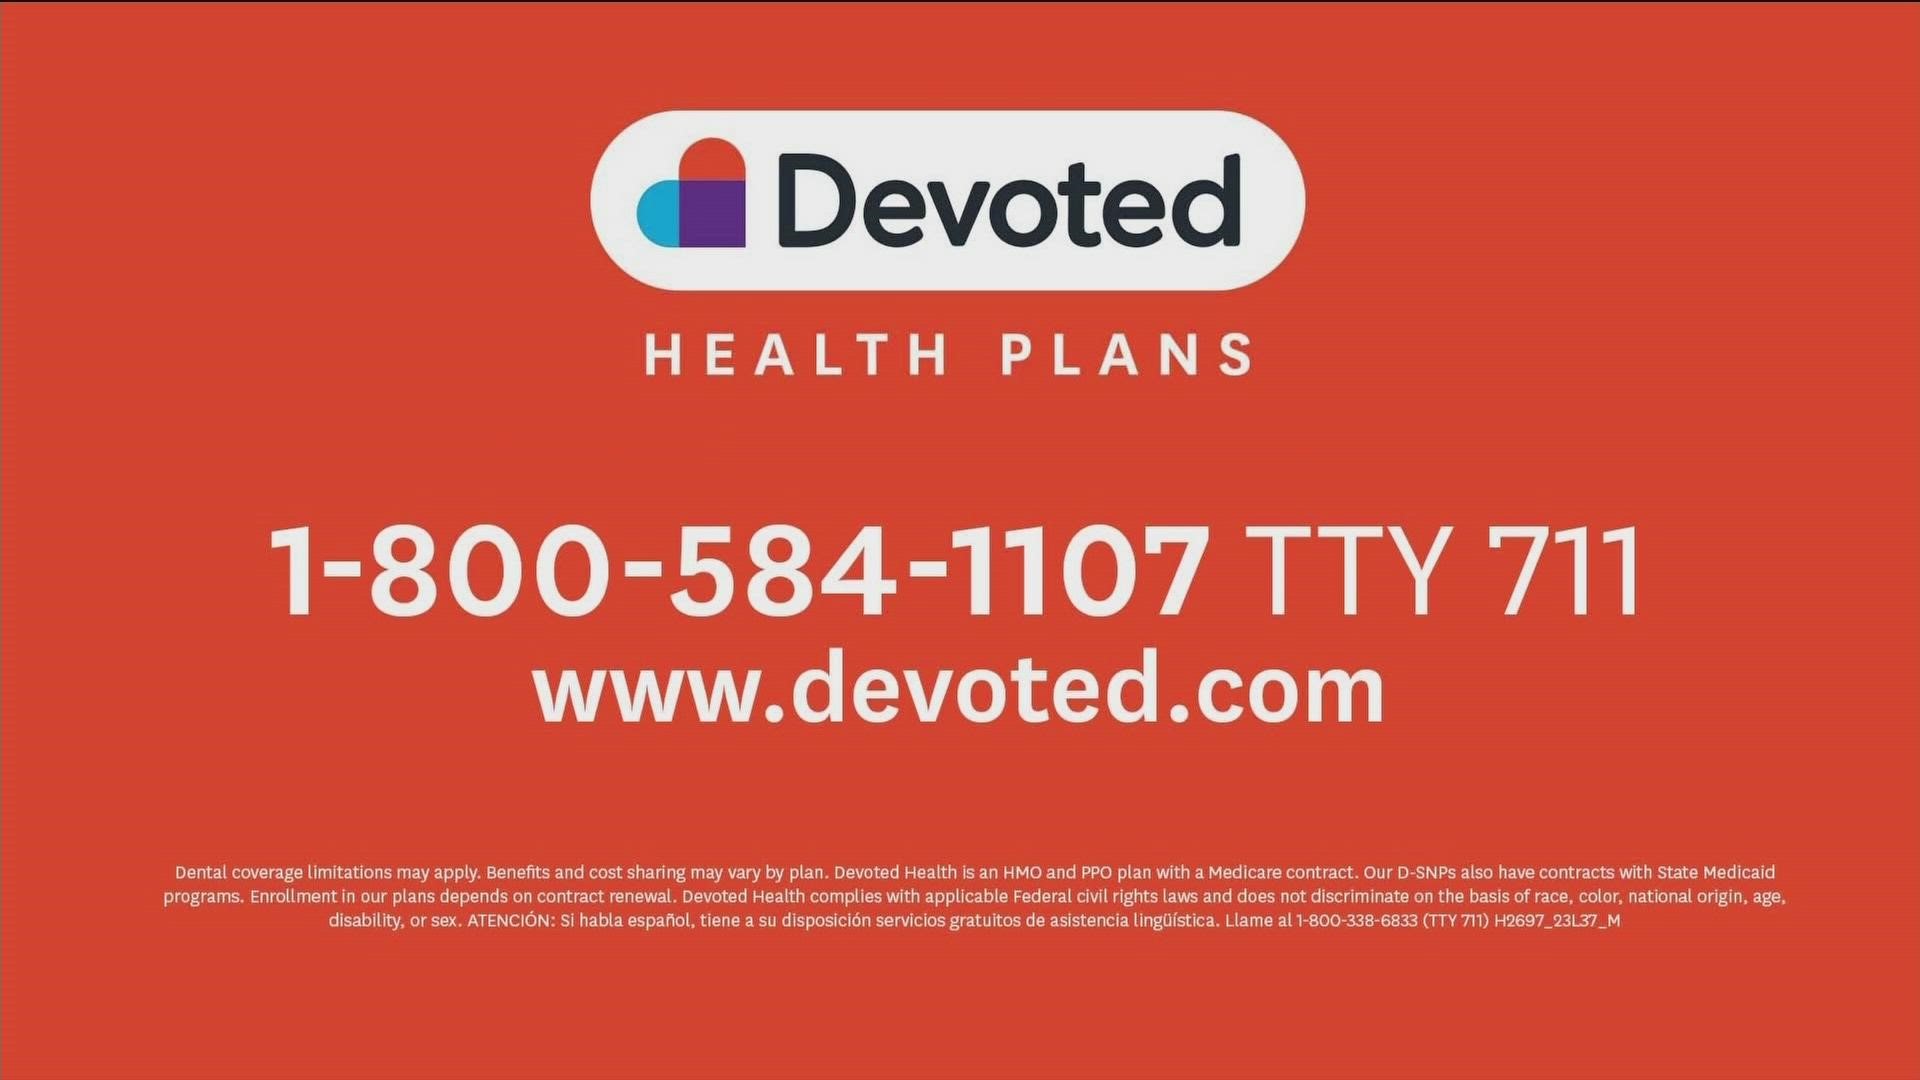 Joe talks with Rich Waldron about the ways Devoted Health plans can help fit your budget. Sponsored by: Devoted Health